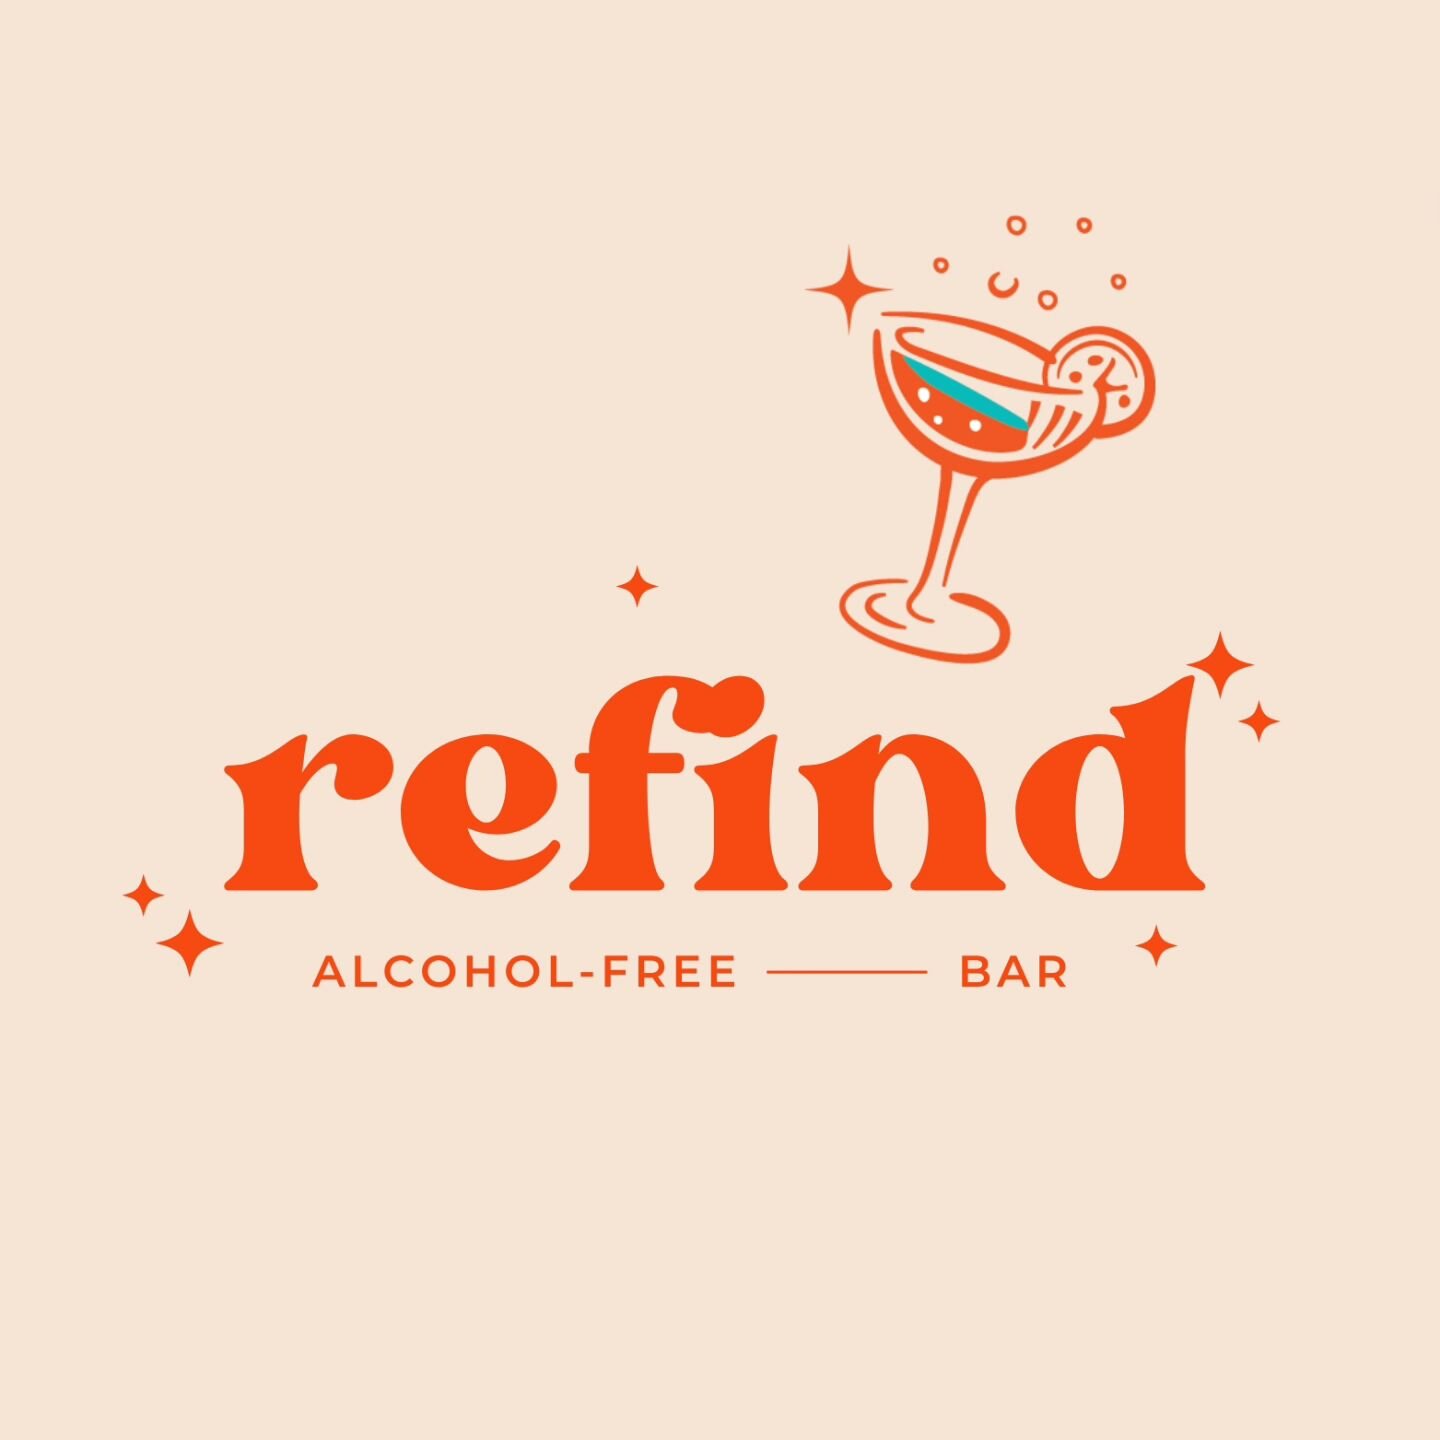 ✨ Introducing Refind ✨

Where sophistication meets discovery 🌺🌎

At Refind, we believe that the heart of the bar experience isn't found in the consumption of alcohol. Instead, it's in the genuine connections forged and the warm hospitality extended